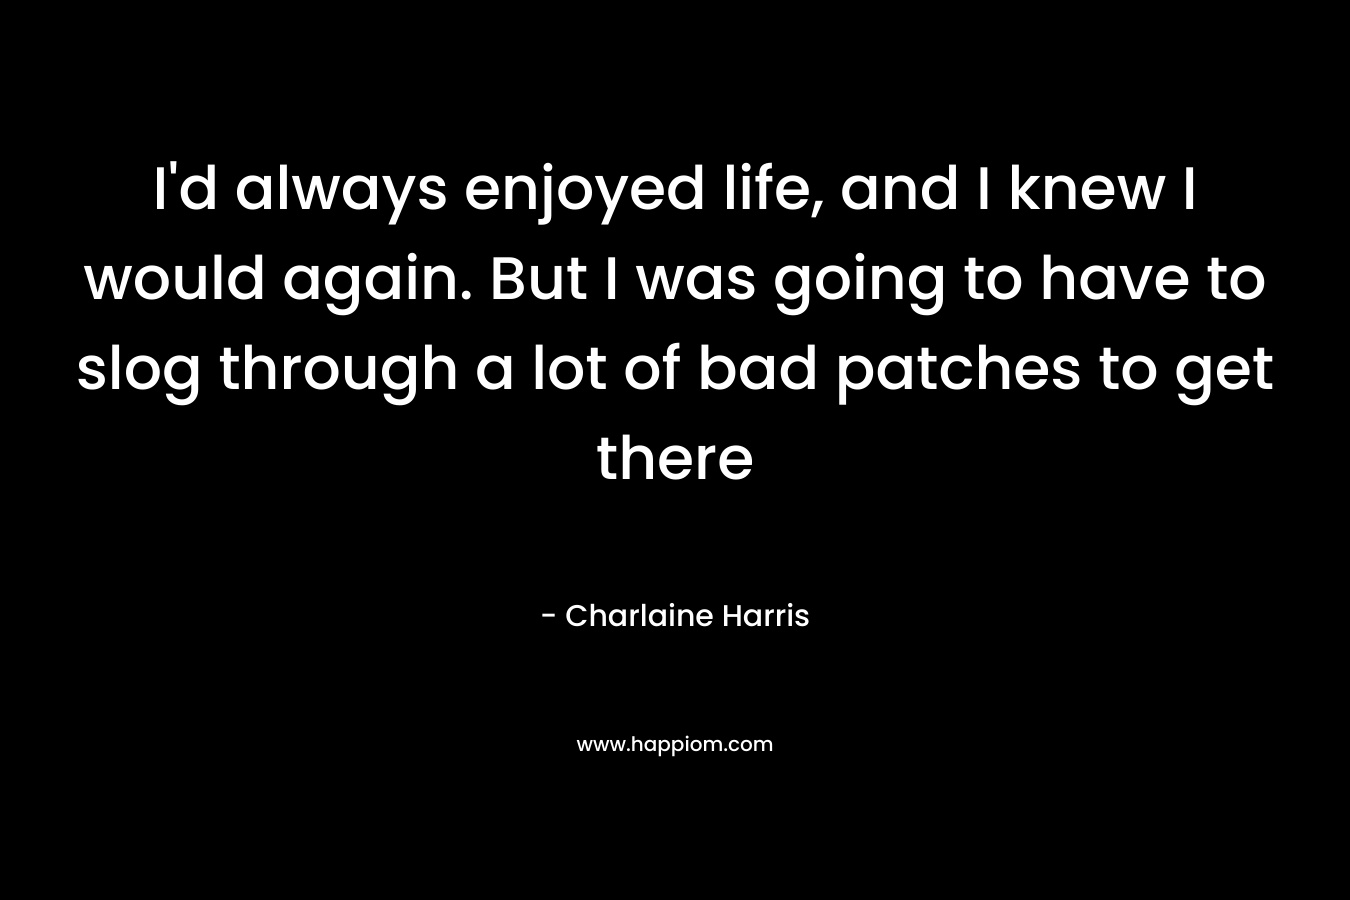 I’d always enjoyed life, and I knew I would again. But I was going to have to slog through a lot of bad patches to get there – Charlaine Harris